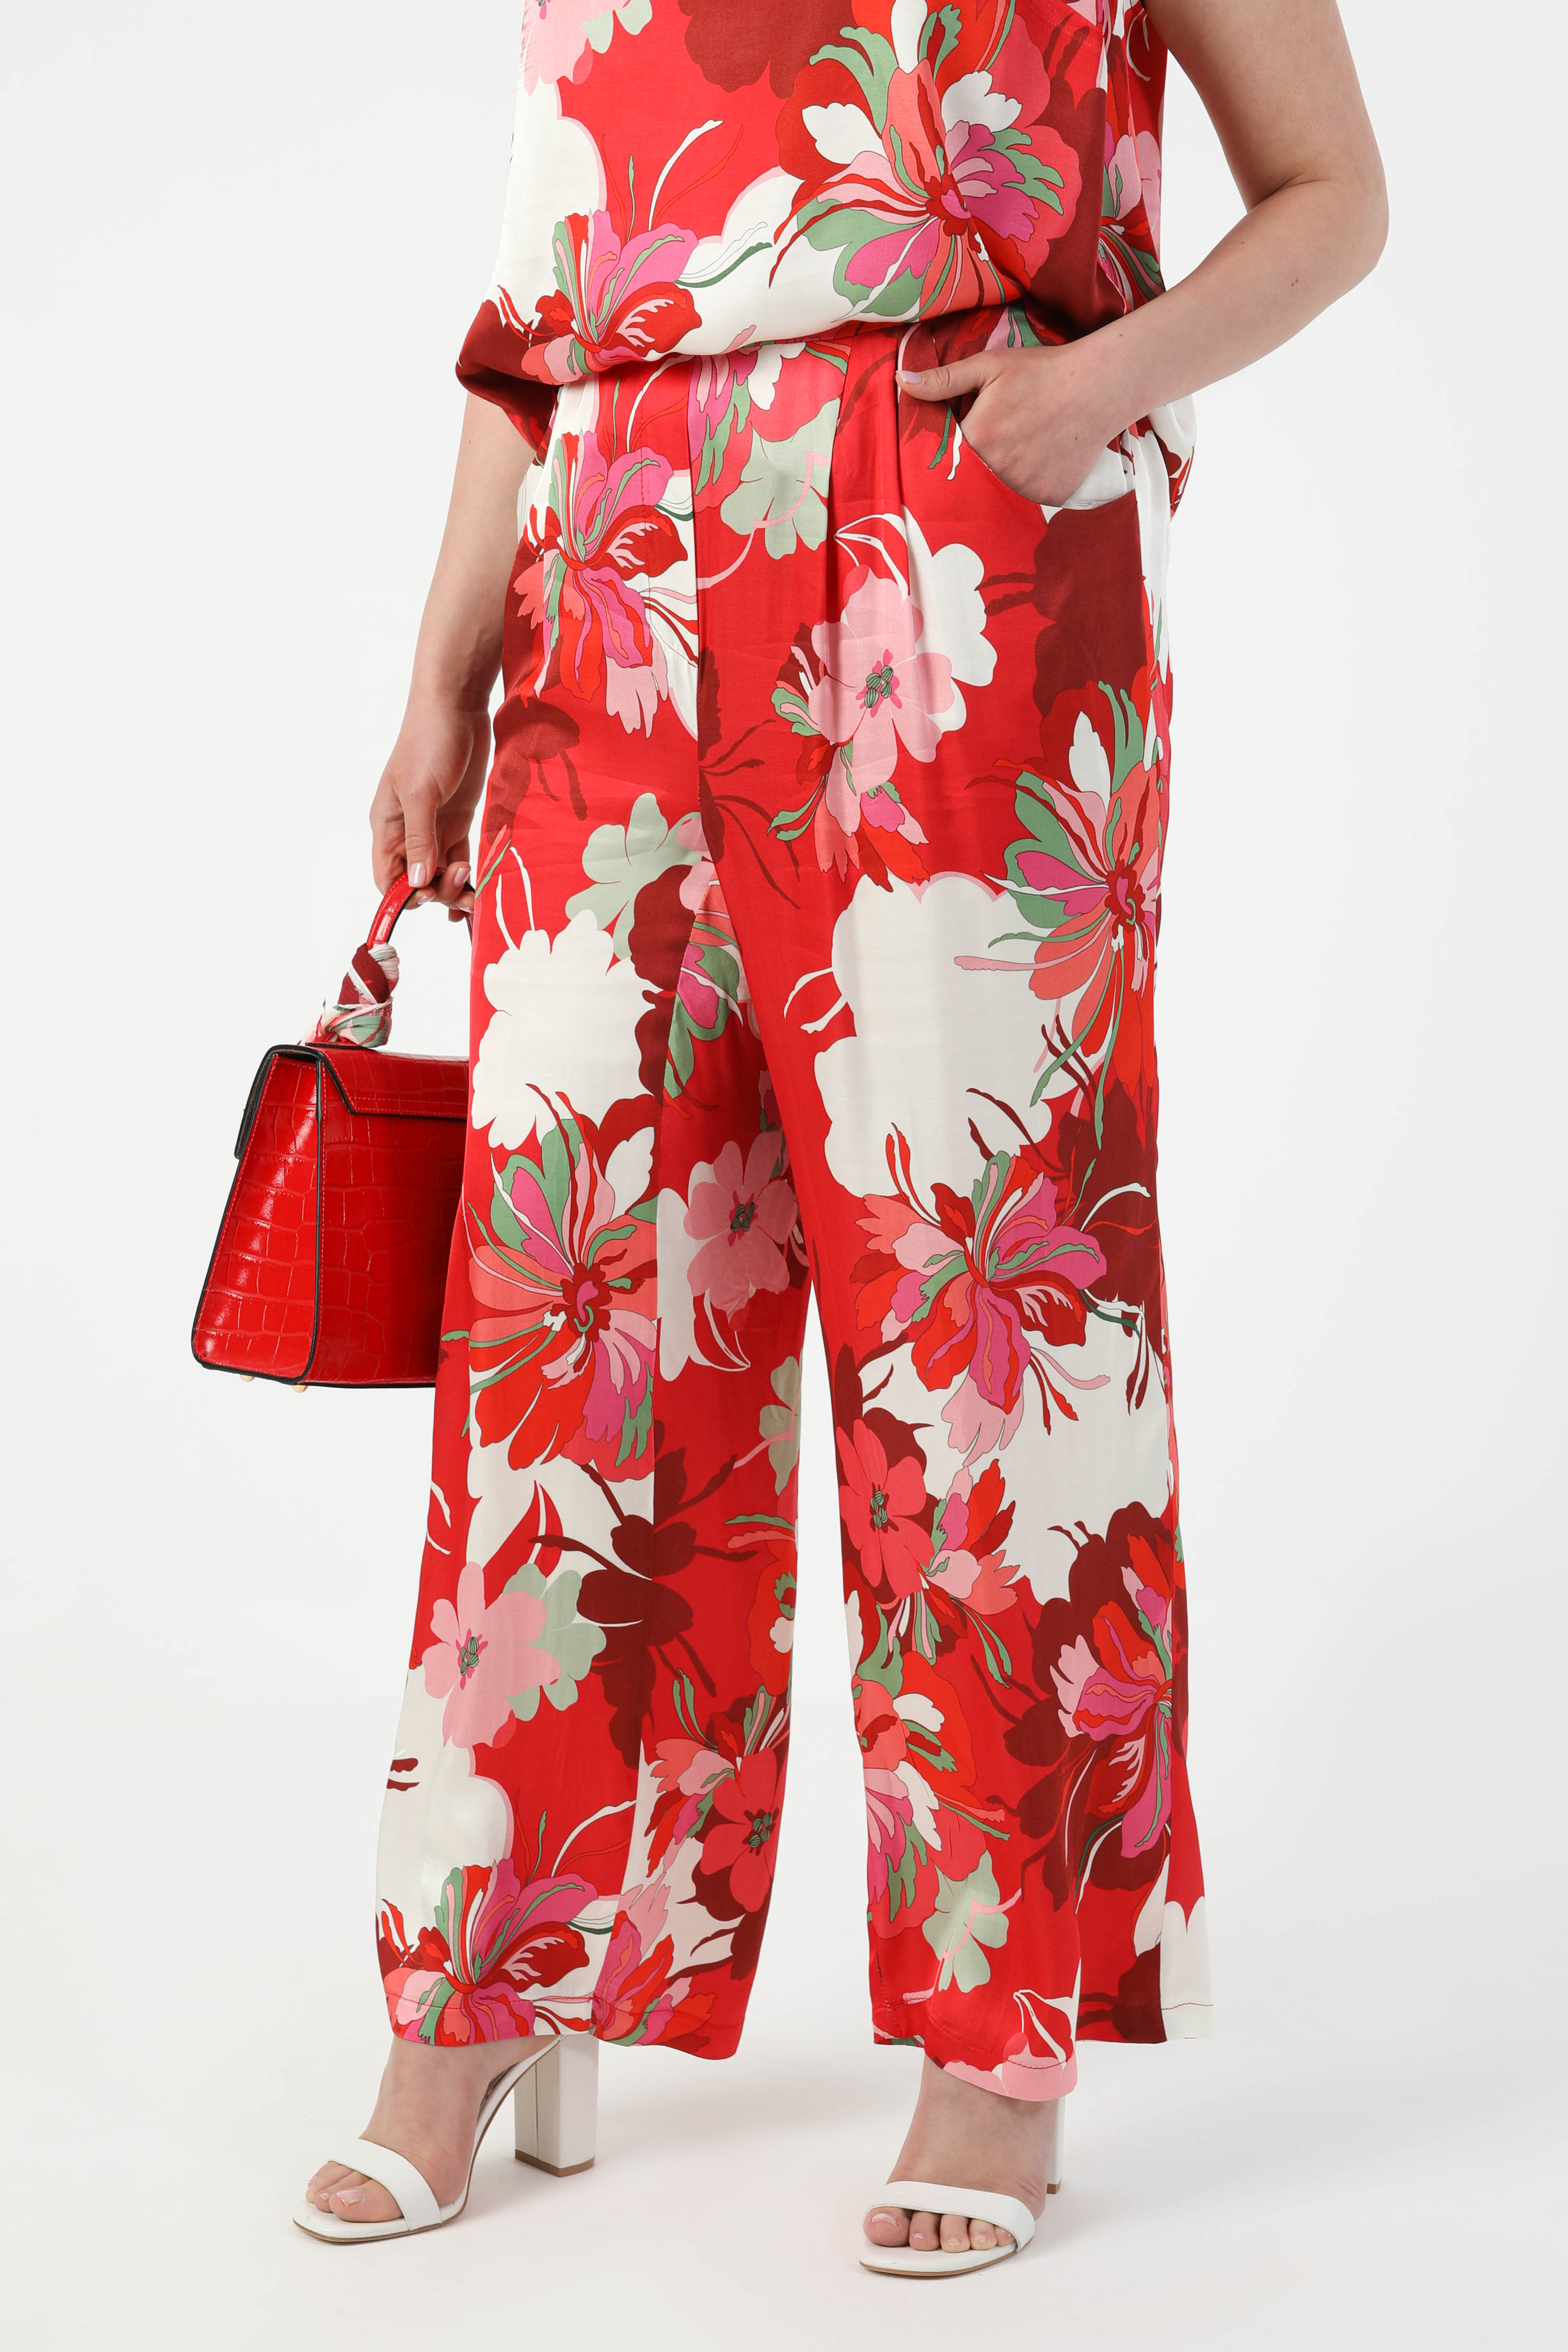 Flowing satin floral print trousers in eco-responsible fabrics